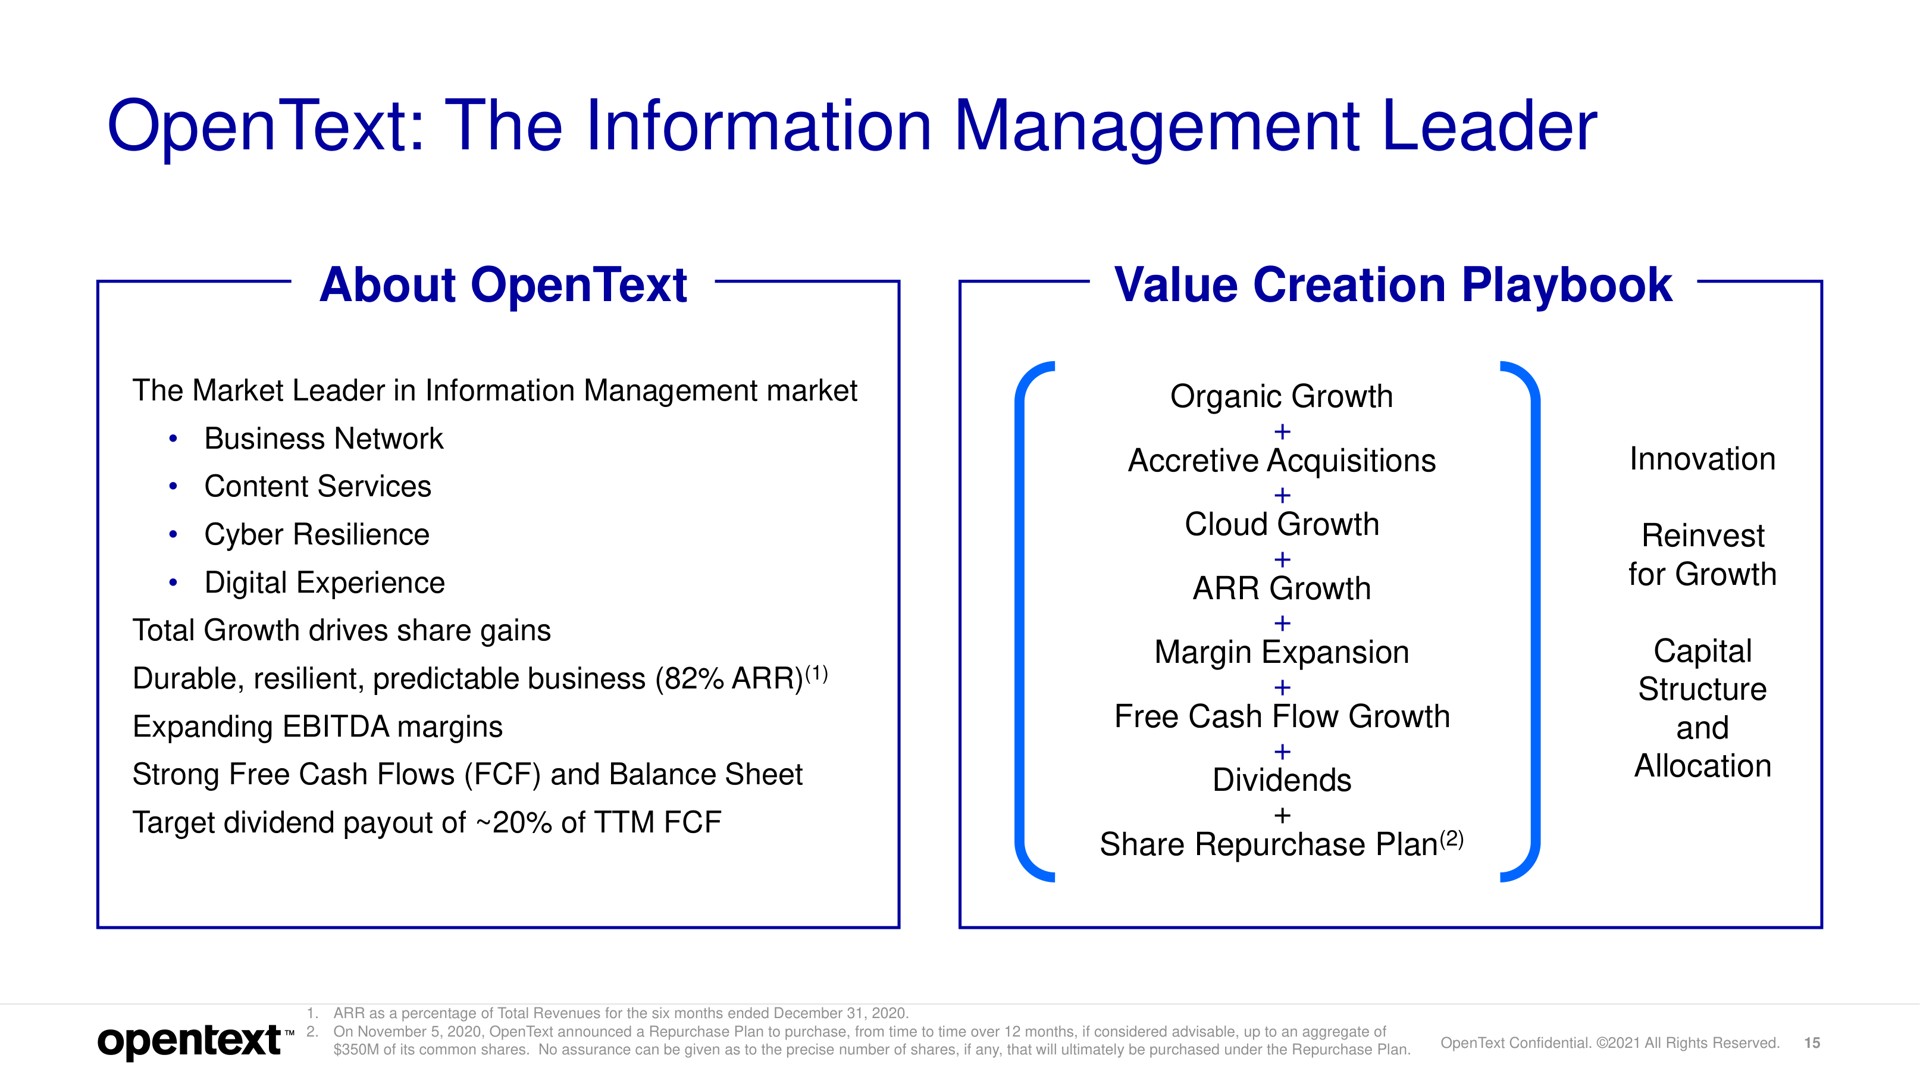 the information management leader about value creation playbook open text tor growth | OpenText